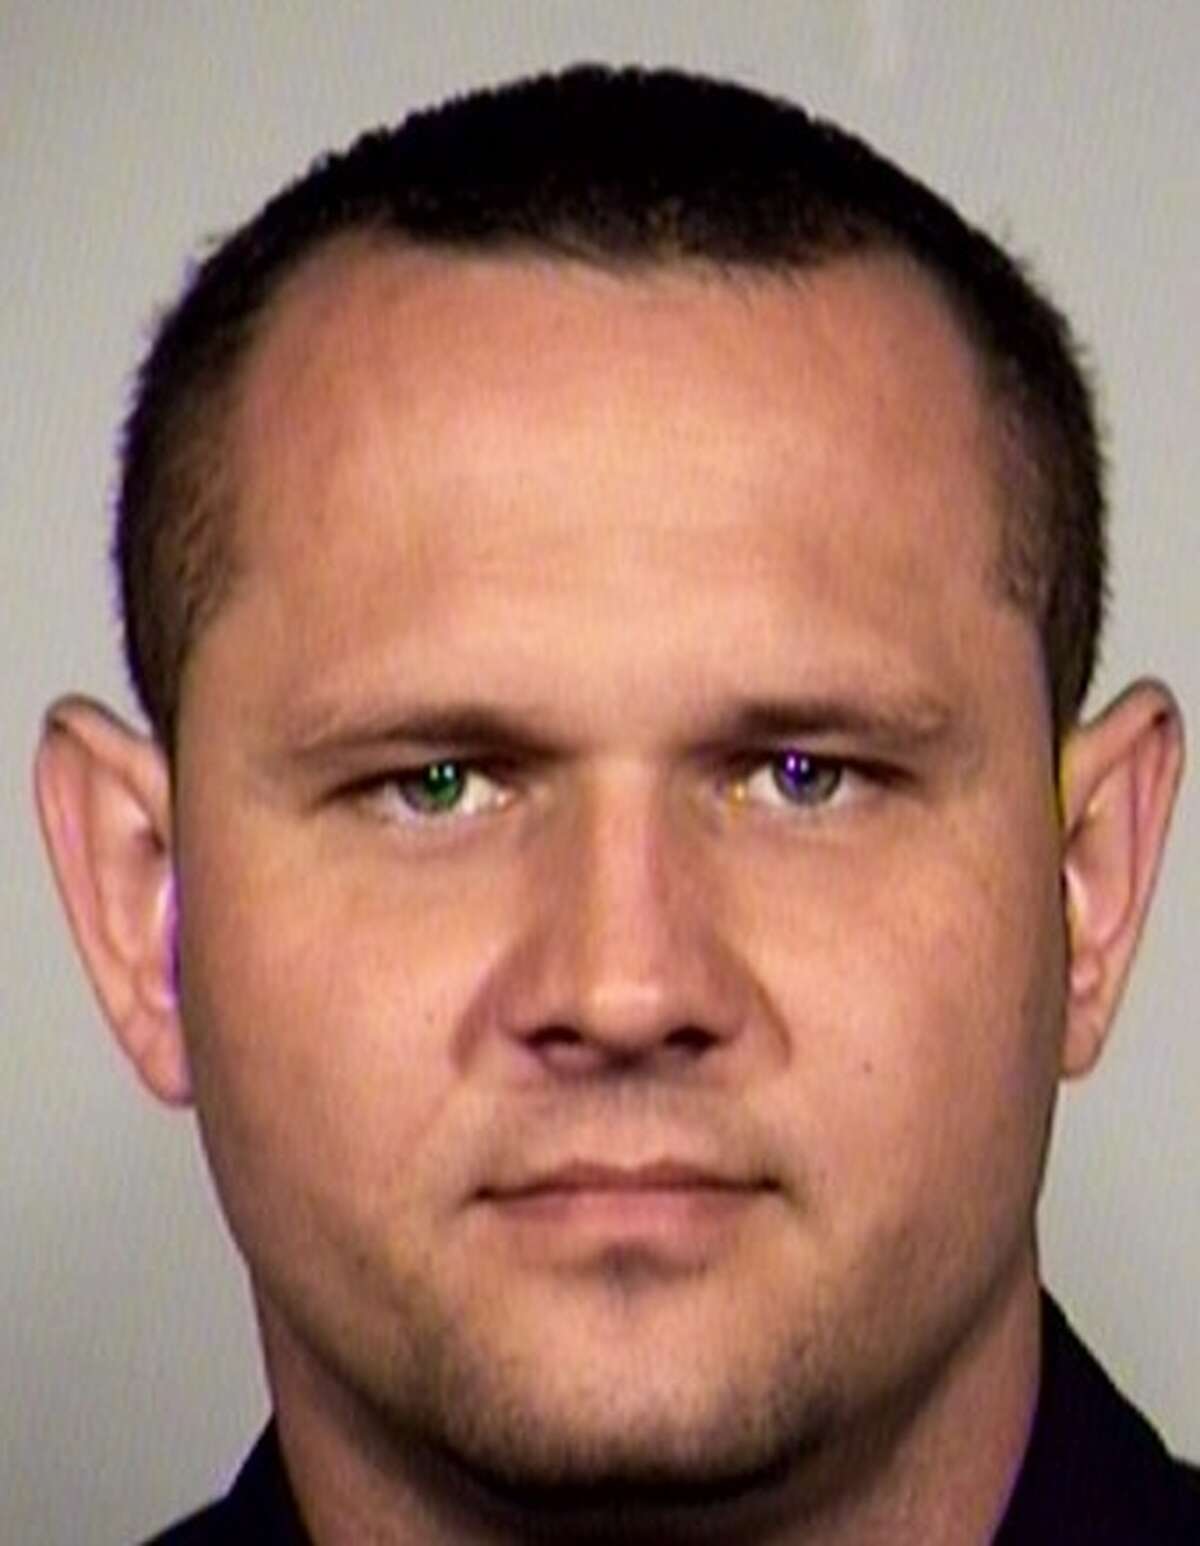 San Antonio Police Department Officer Konrad Chatys faces a charge of theft by a public servant.